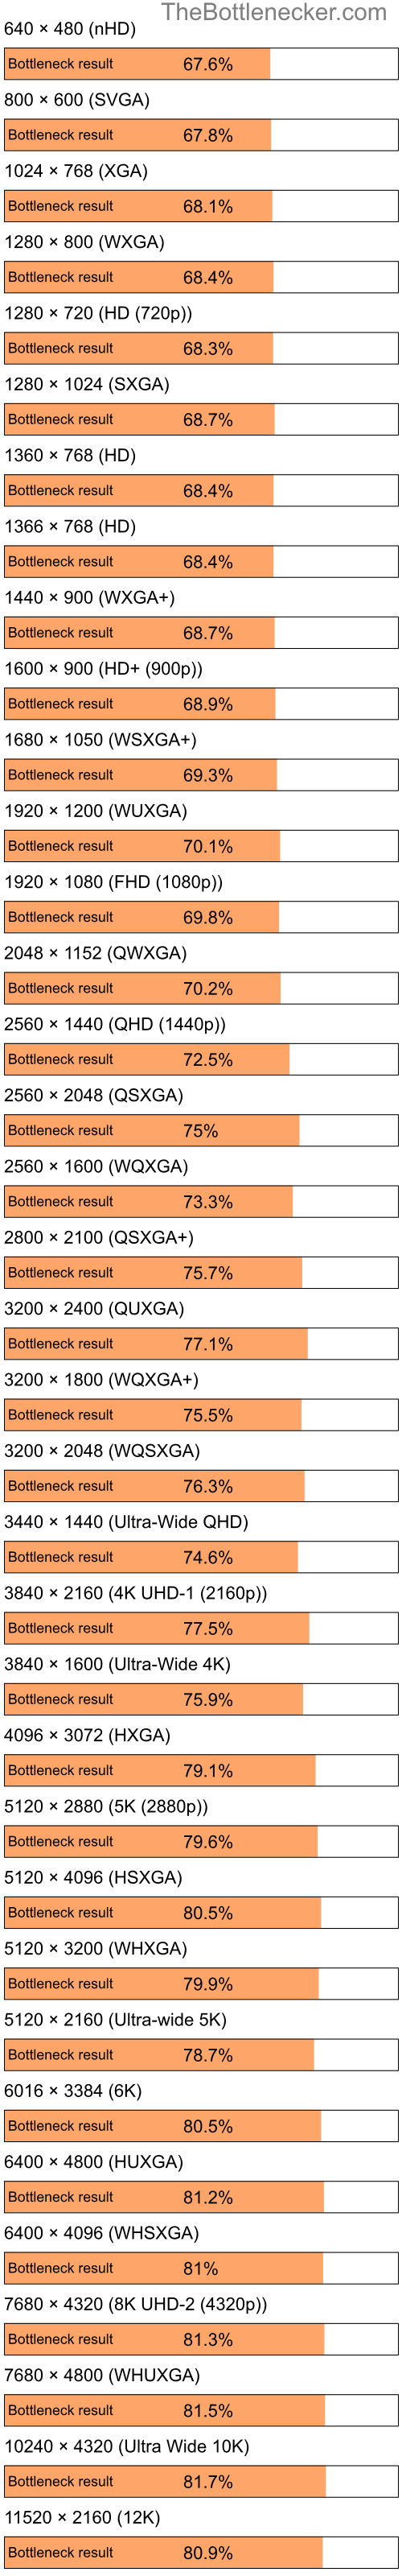 Bottleneck results by resolution for Intel Pentium 4 and AMD Mobility Radeon X2300 in Processor Intense Tasks